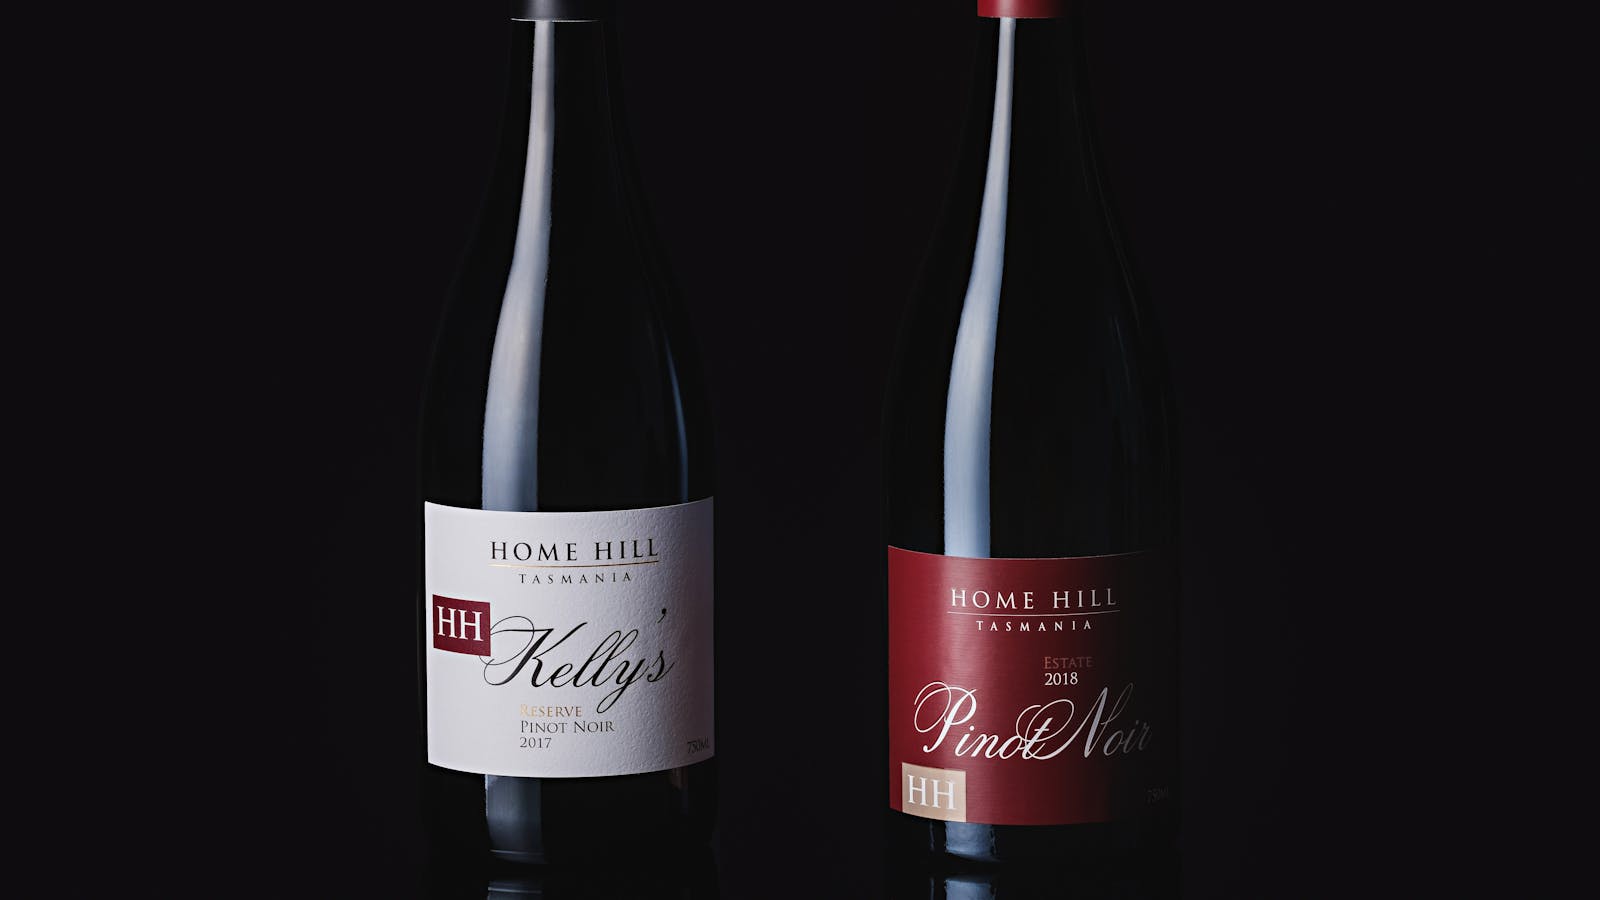 2018 Home Hill Estate Pinot Noir, 2017 Home Hill Kelly's Reserve Pinot Noir(99 points James Halliday